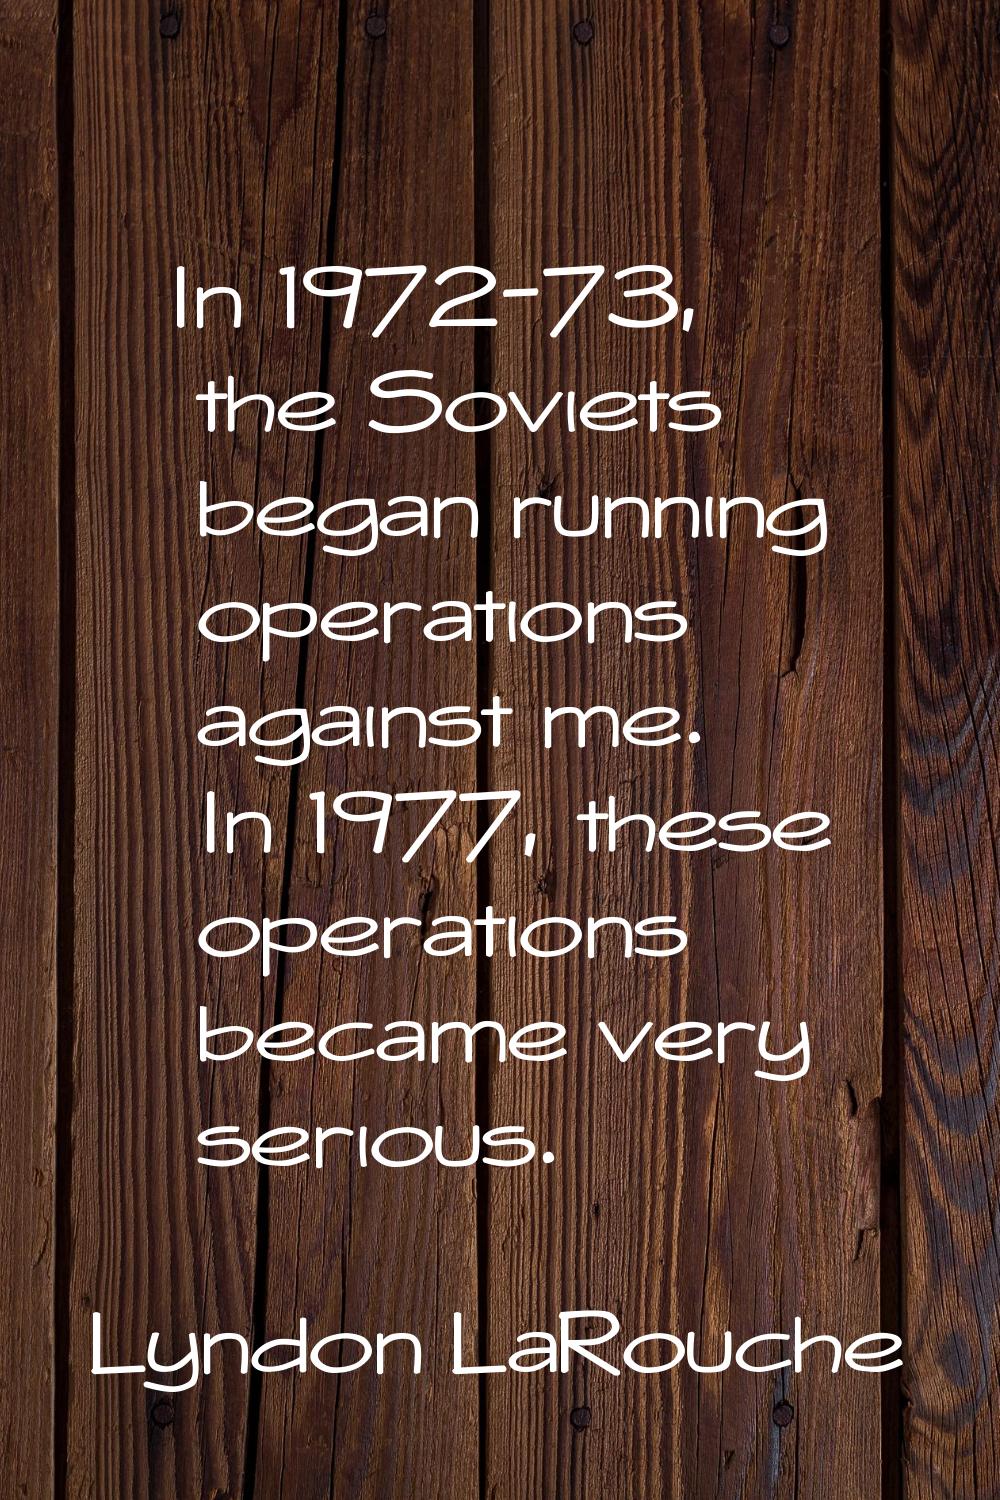 In 1972-73, the Soviets began running operations against me. In 1977, these operations became very 